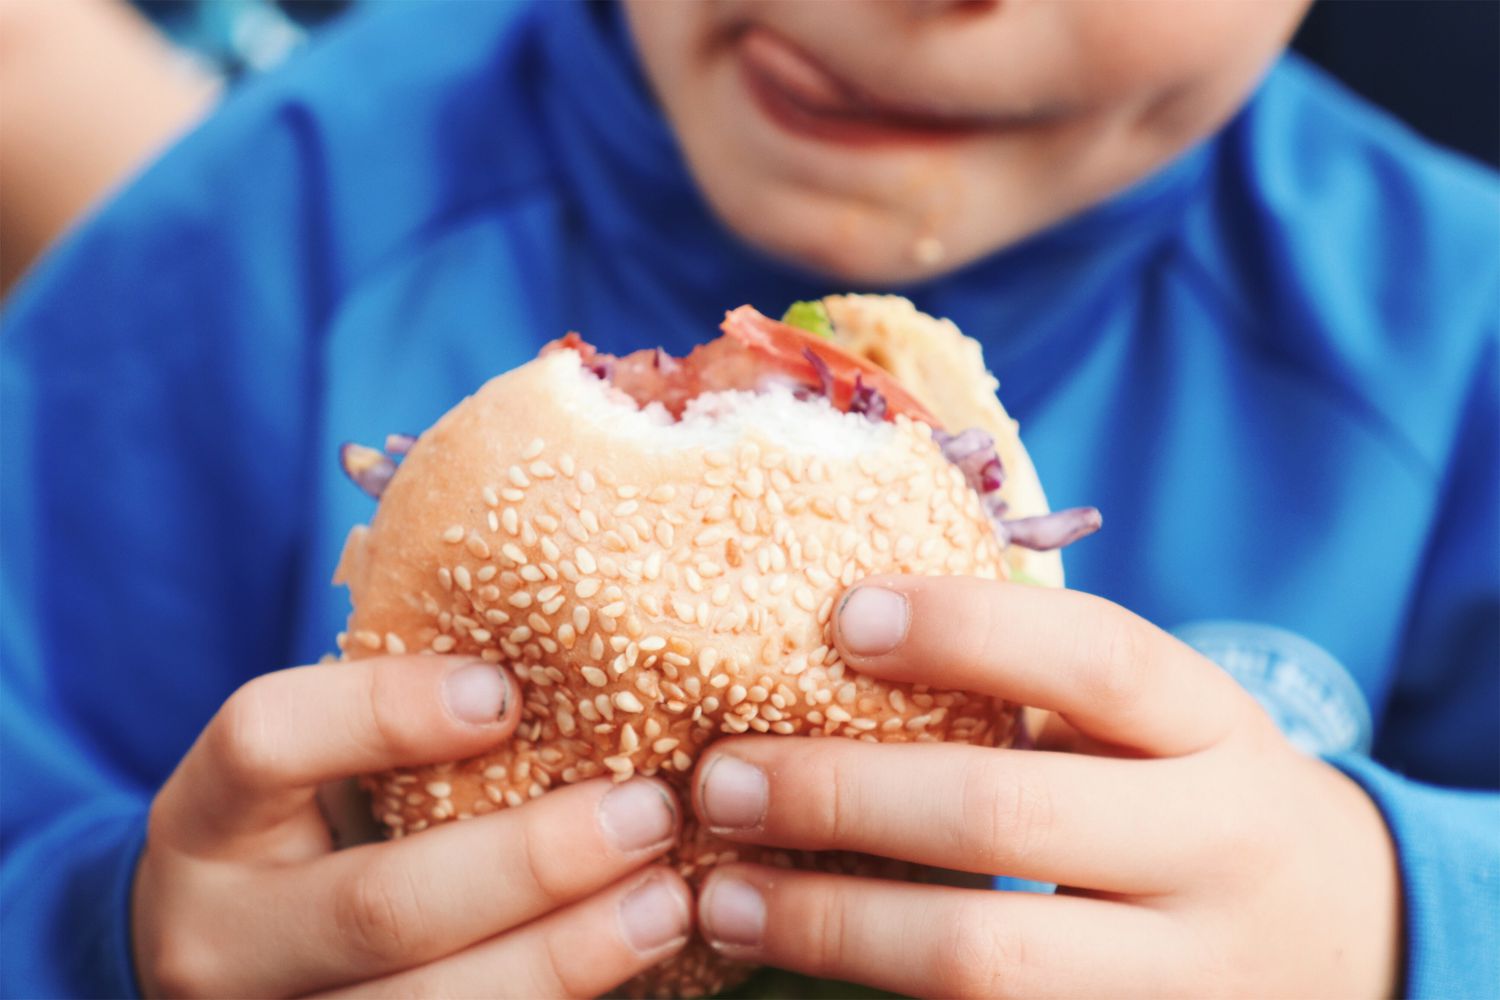 Midsection Of Boy Holding Burger Licking Lips